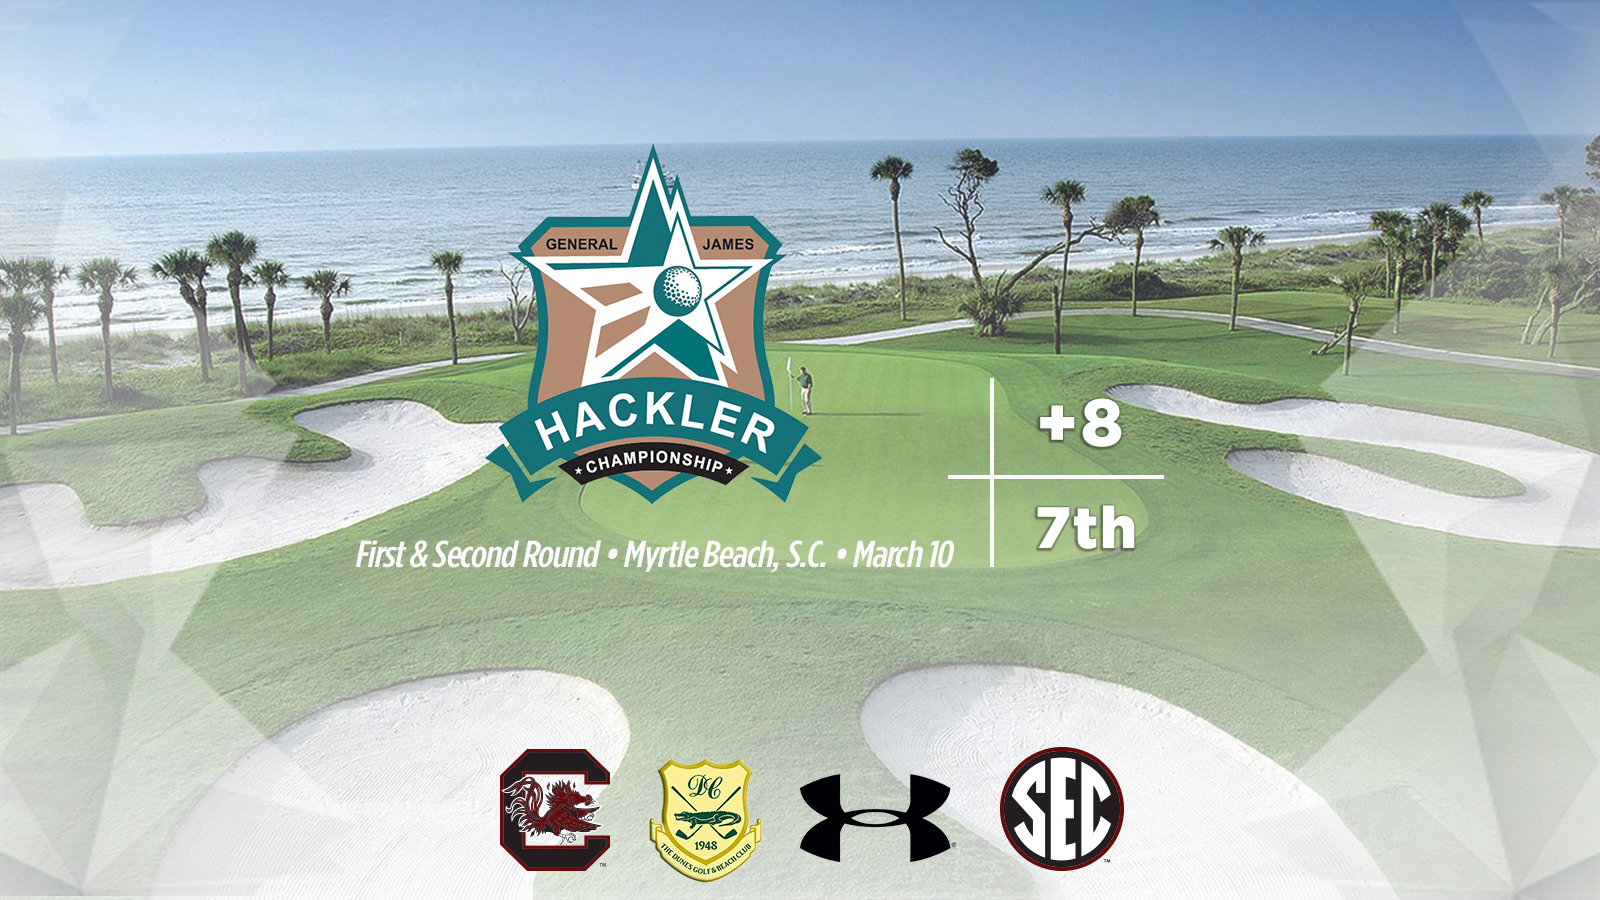 Gamecocks in seventh after two rounds of General Hackler